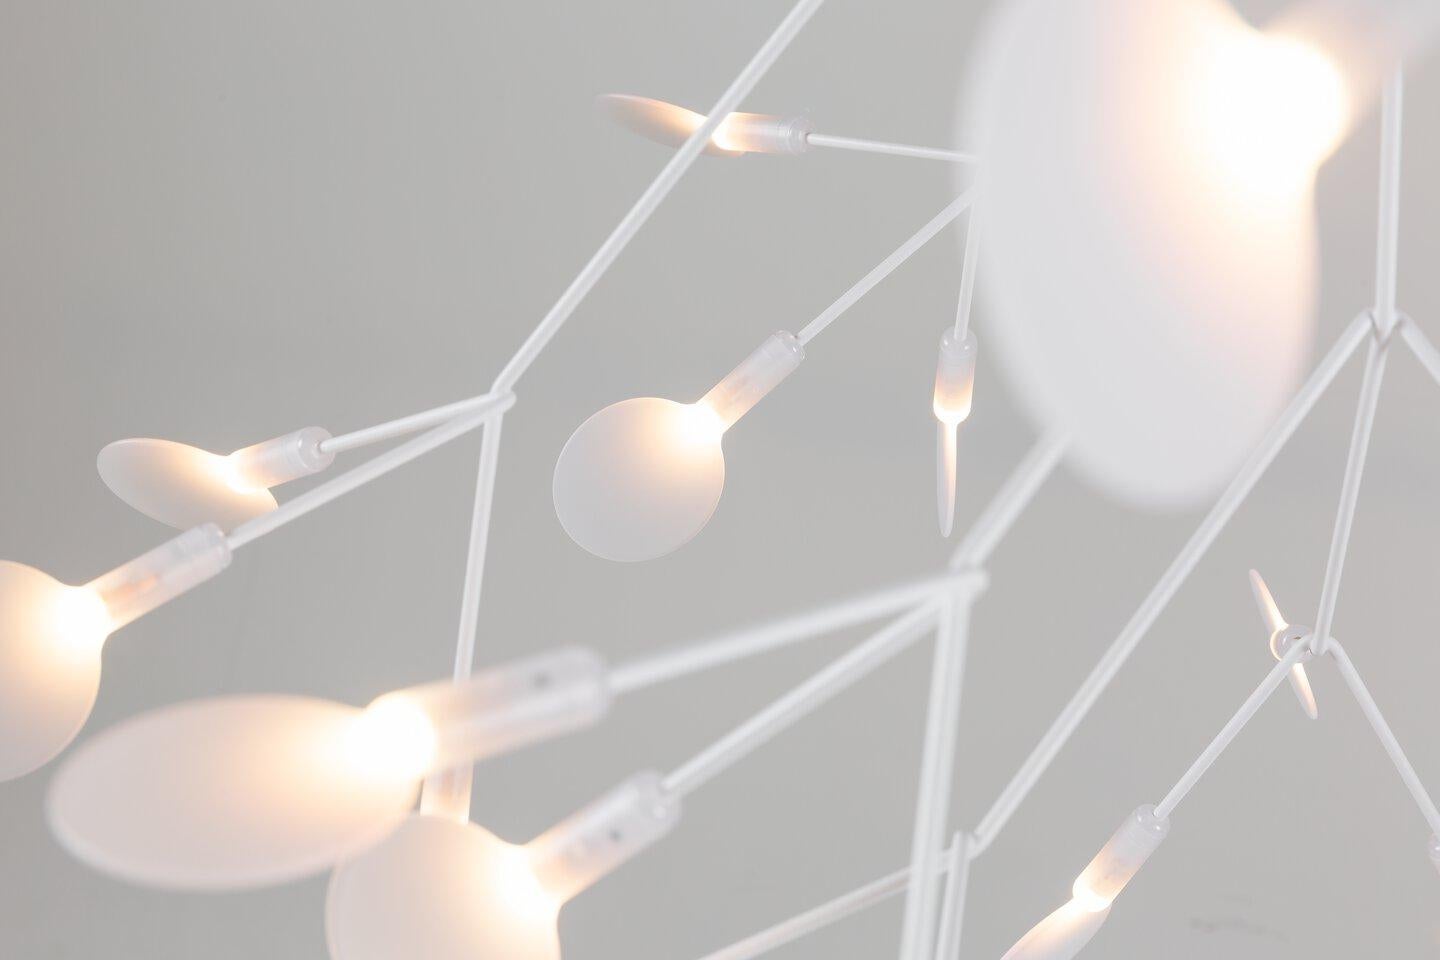 Nature meets technology in the Heracleum II Suspended by Bertjan Pot. This airy LED lamp is inspired by the flowering plant of the same name that can grow as high as 5 metres. The white leaves in the Heracleum II Suspended ramify from one branch